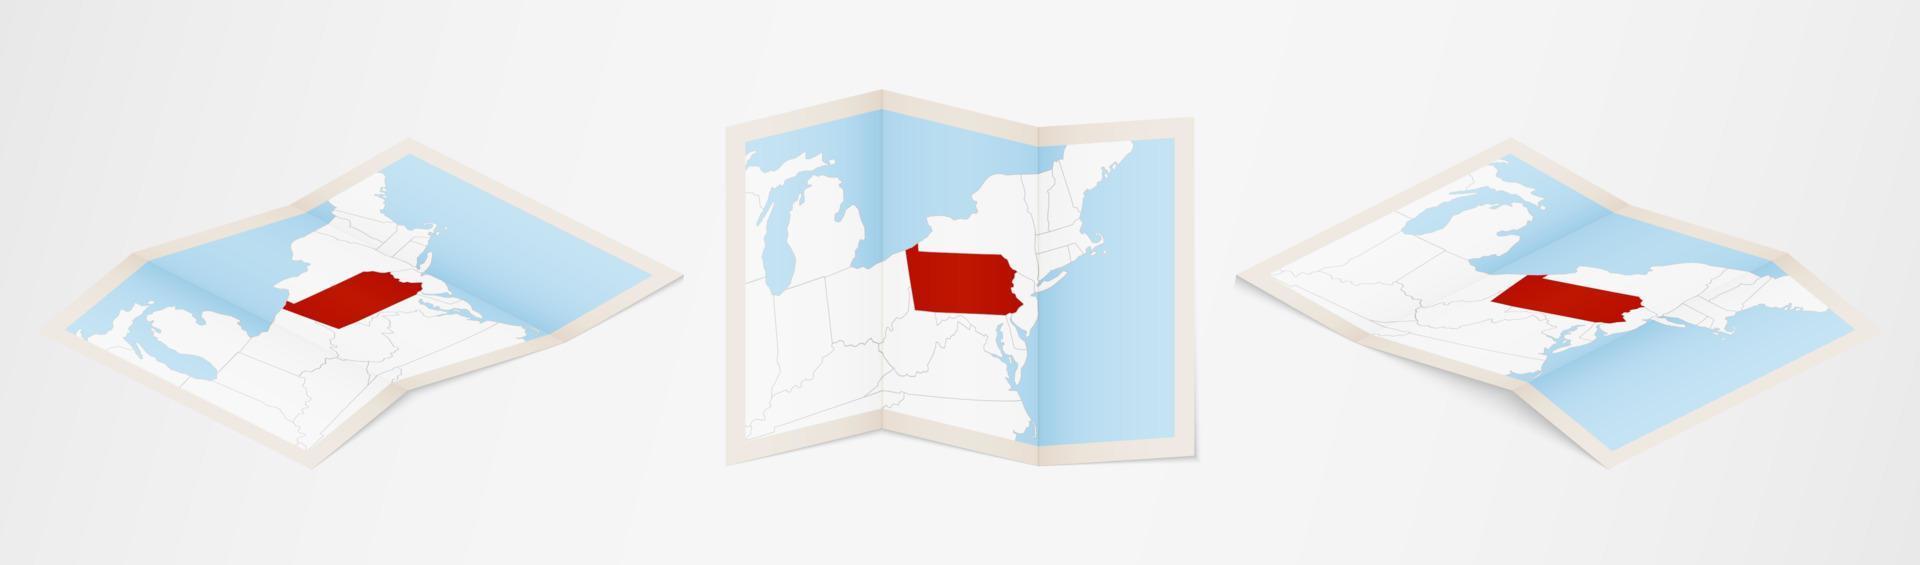 Folded map of Pennsylvania in three different versions. vector